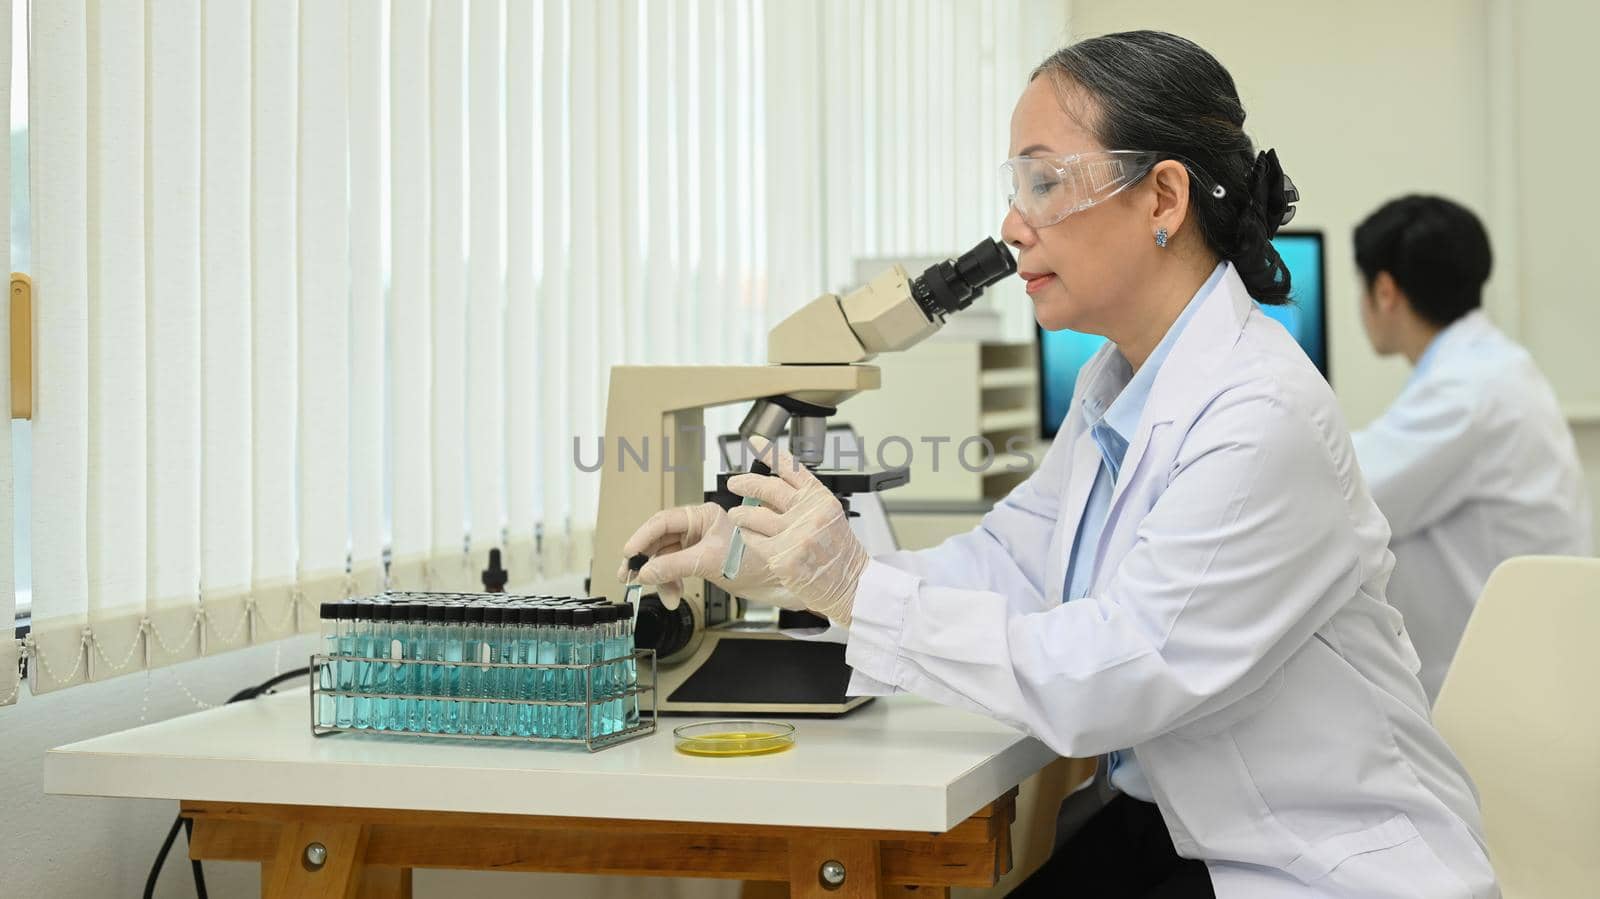 Mature female scientist in white coat examining samples and liquid in laboratory. Medicine and science researching concepts.